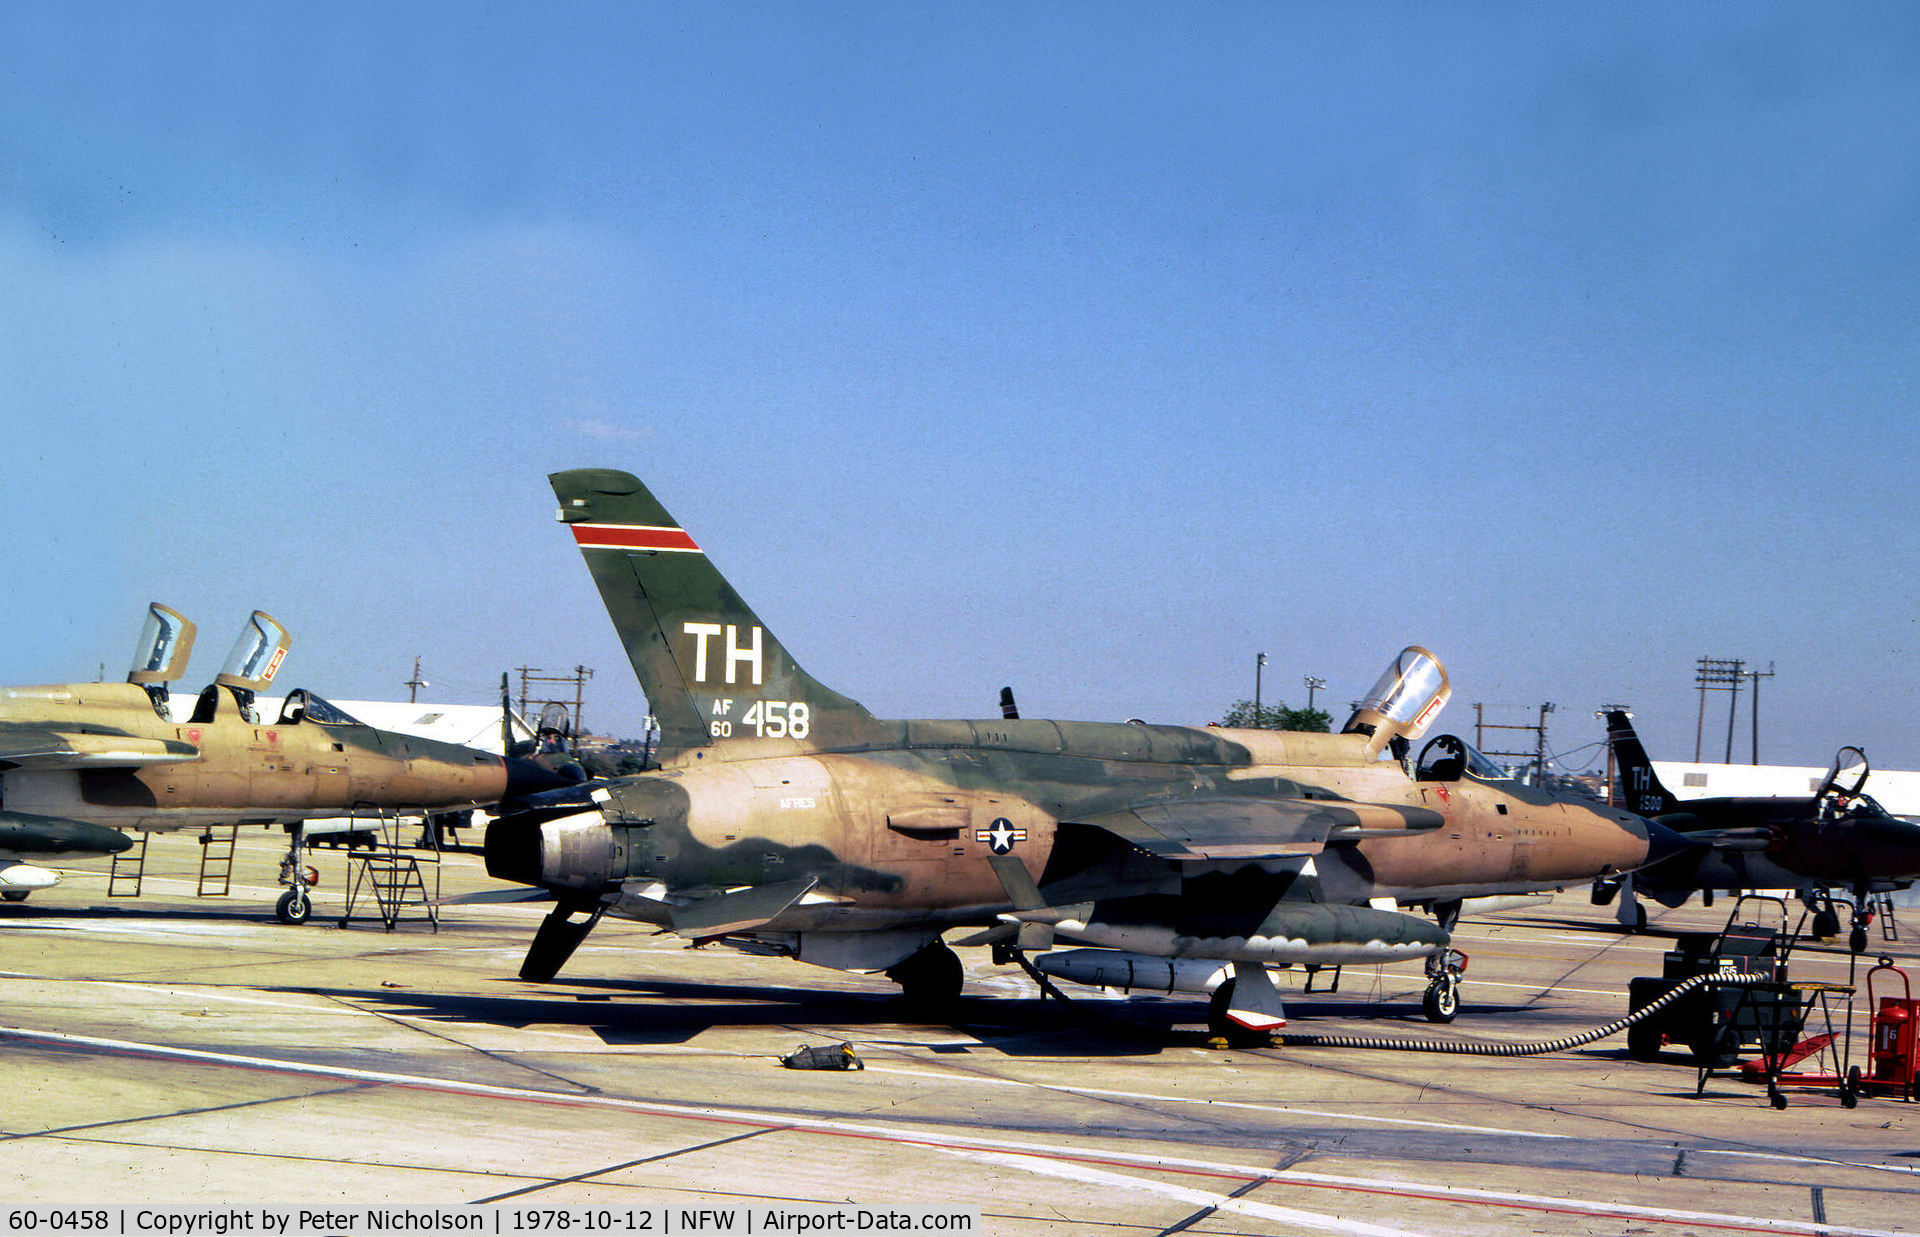 60-0458, 1960 Republic F-105D Thunderchief C/N D146, F-105D Thunderchief of the 457th Tactical Fighter Squadron/301st Tactical Fighter Wing on the flight-line at Carswell AFB in October 1978.